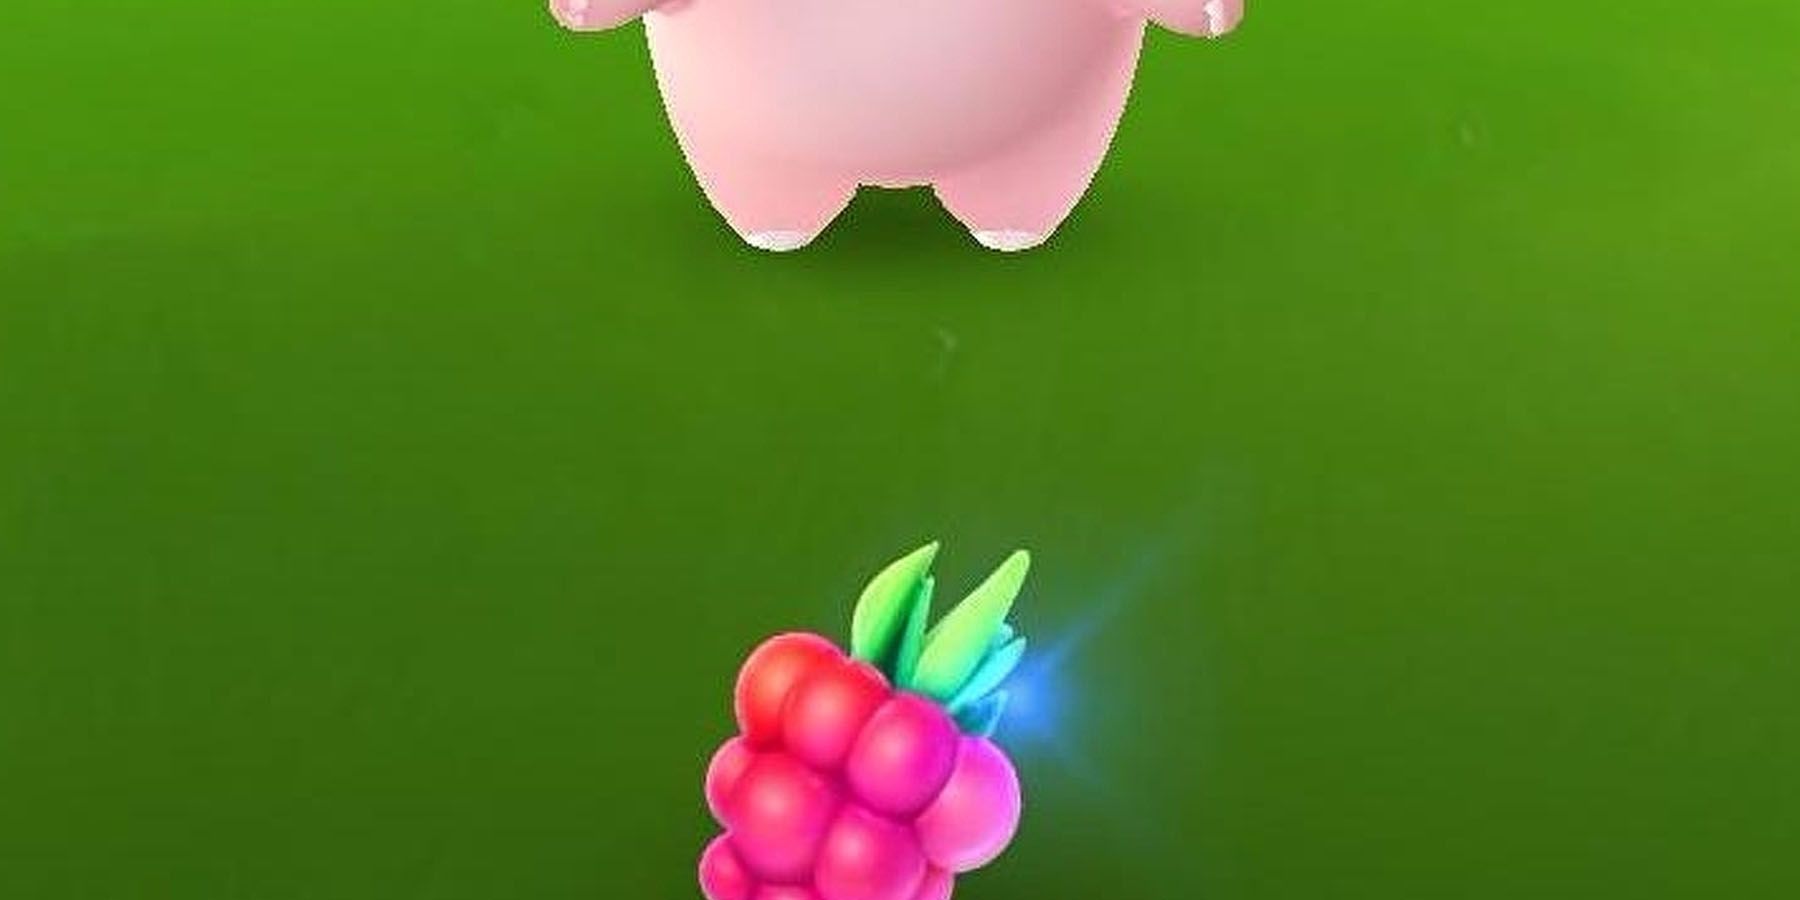 A Razz Berry about to be used in Pokemon GO